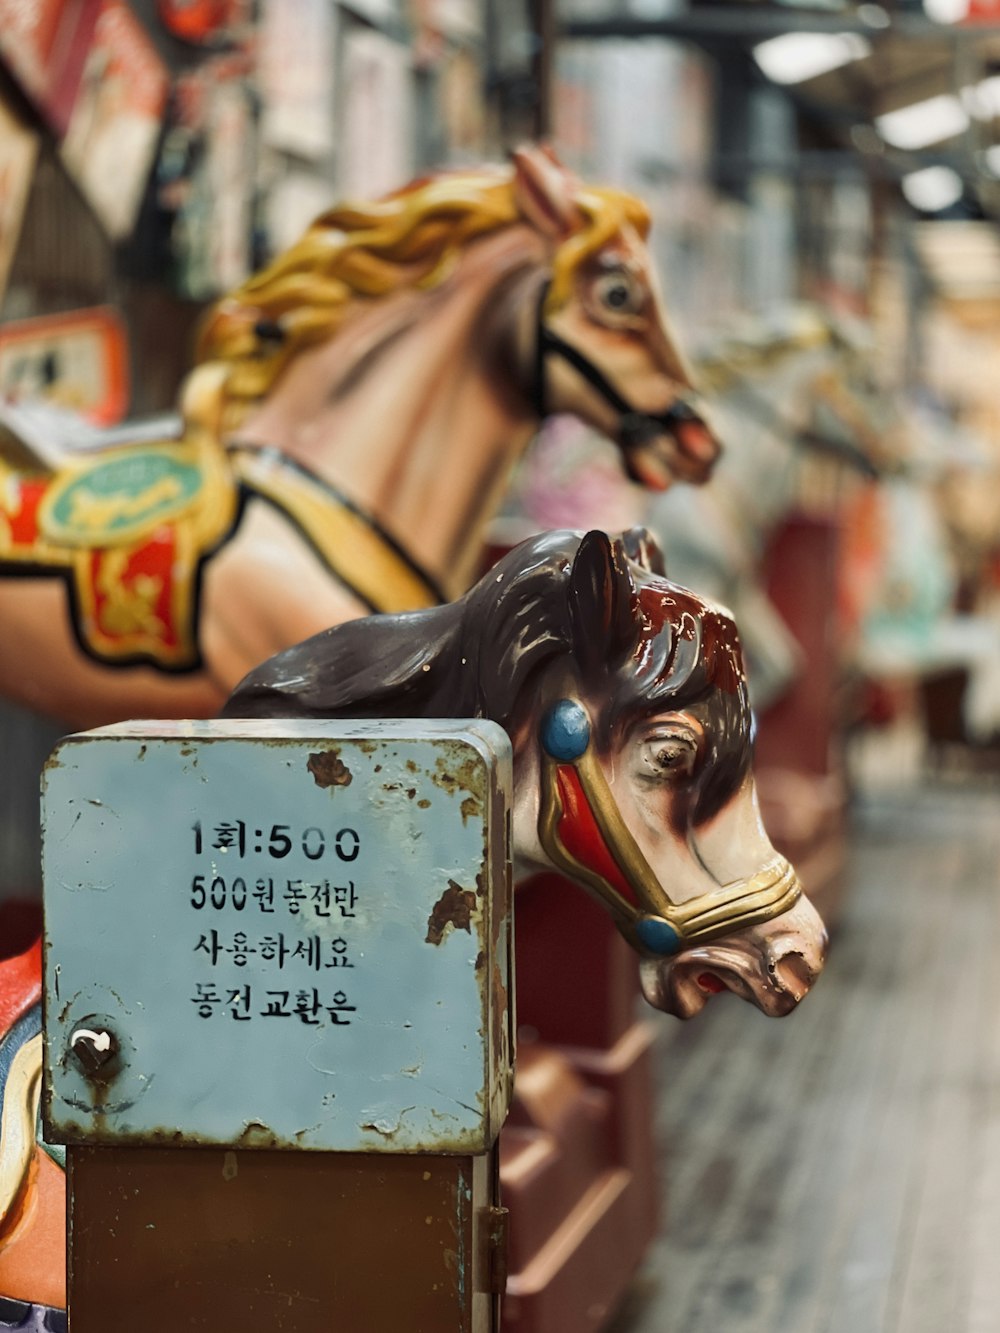 a close up of a horse head on a carousel